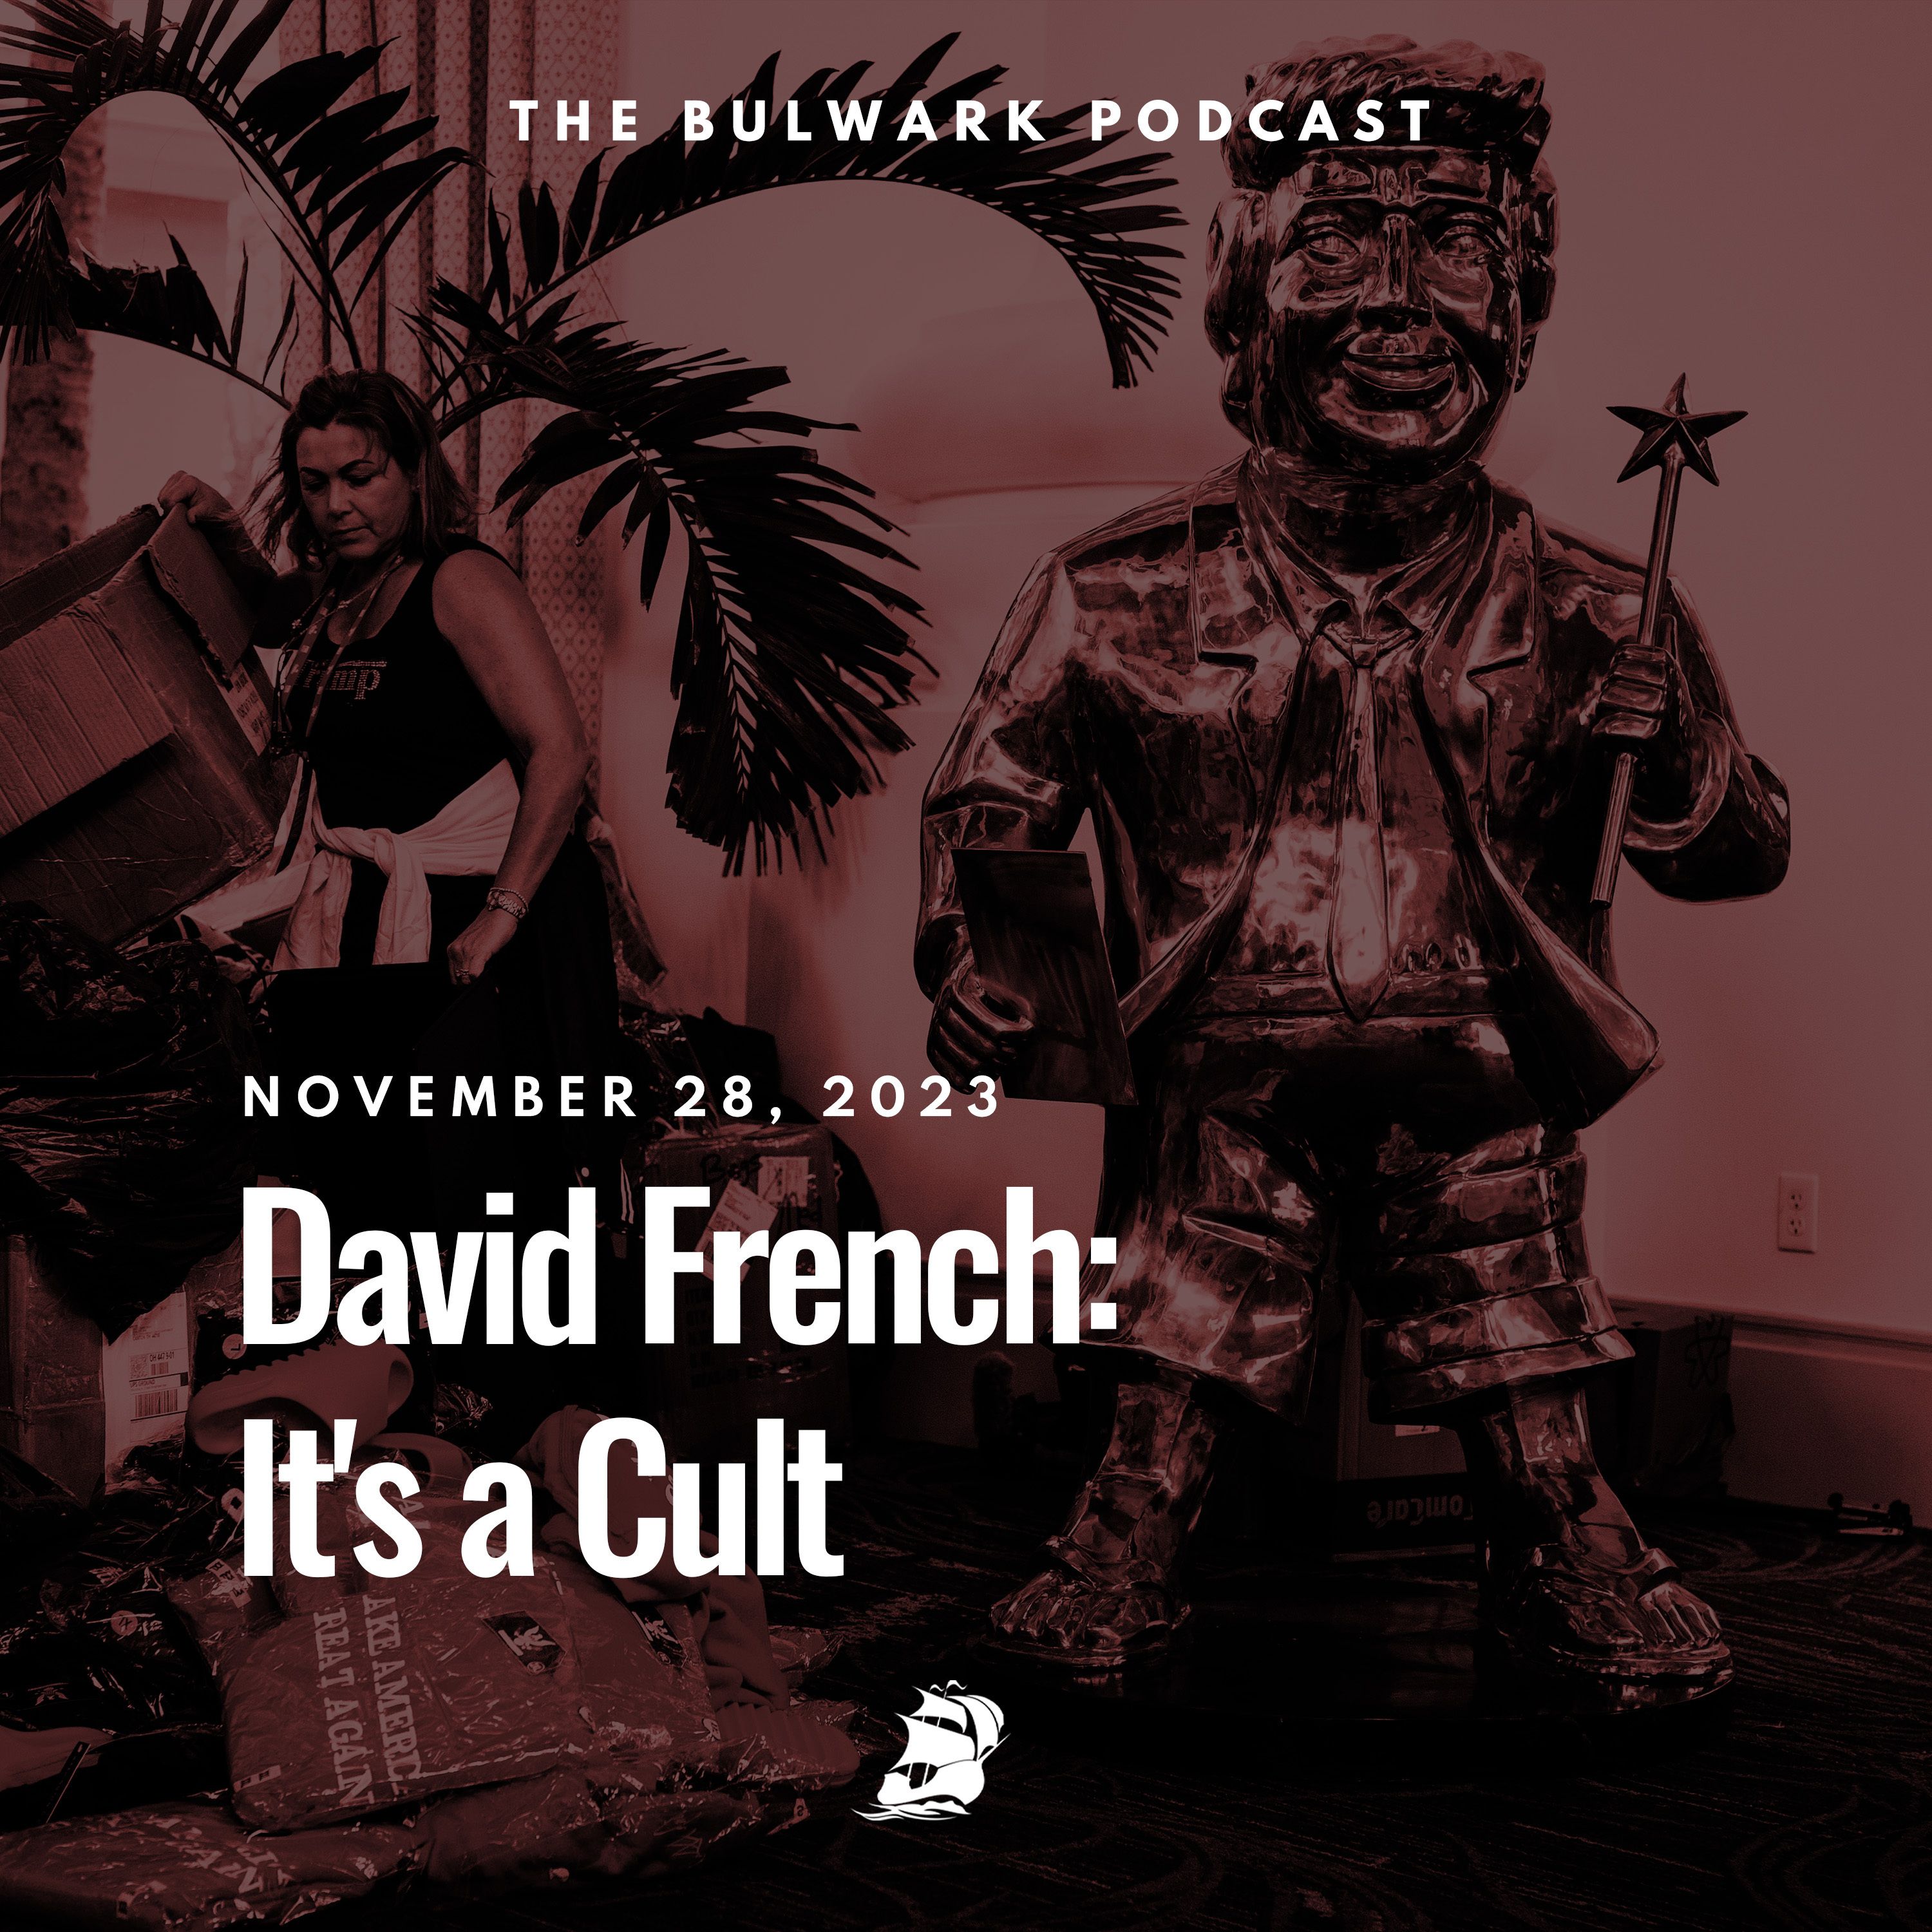 David French: It's a Cult by The Bulwark Podcast